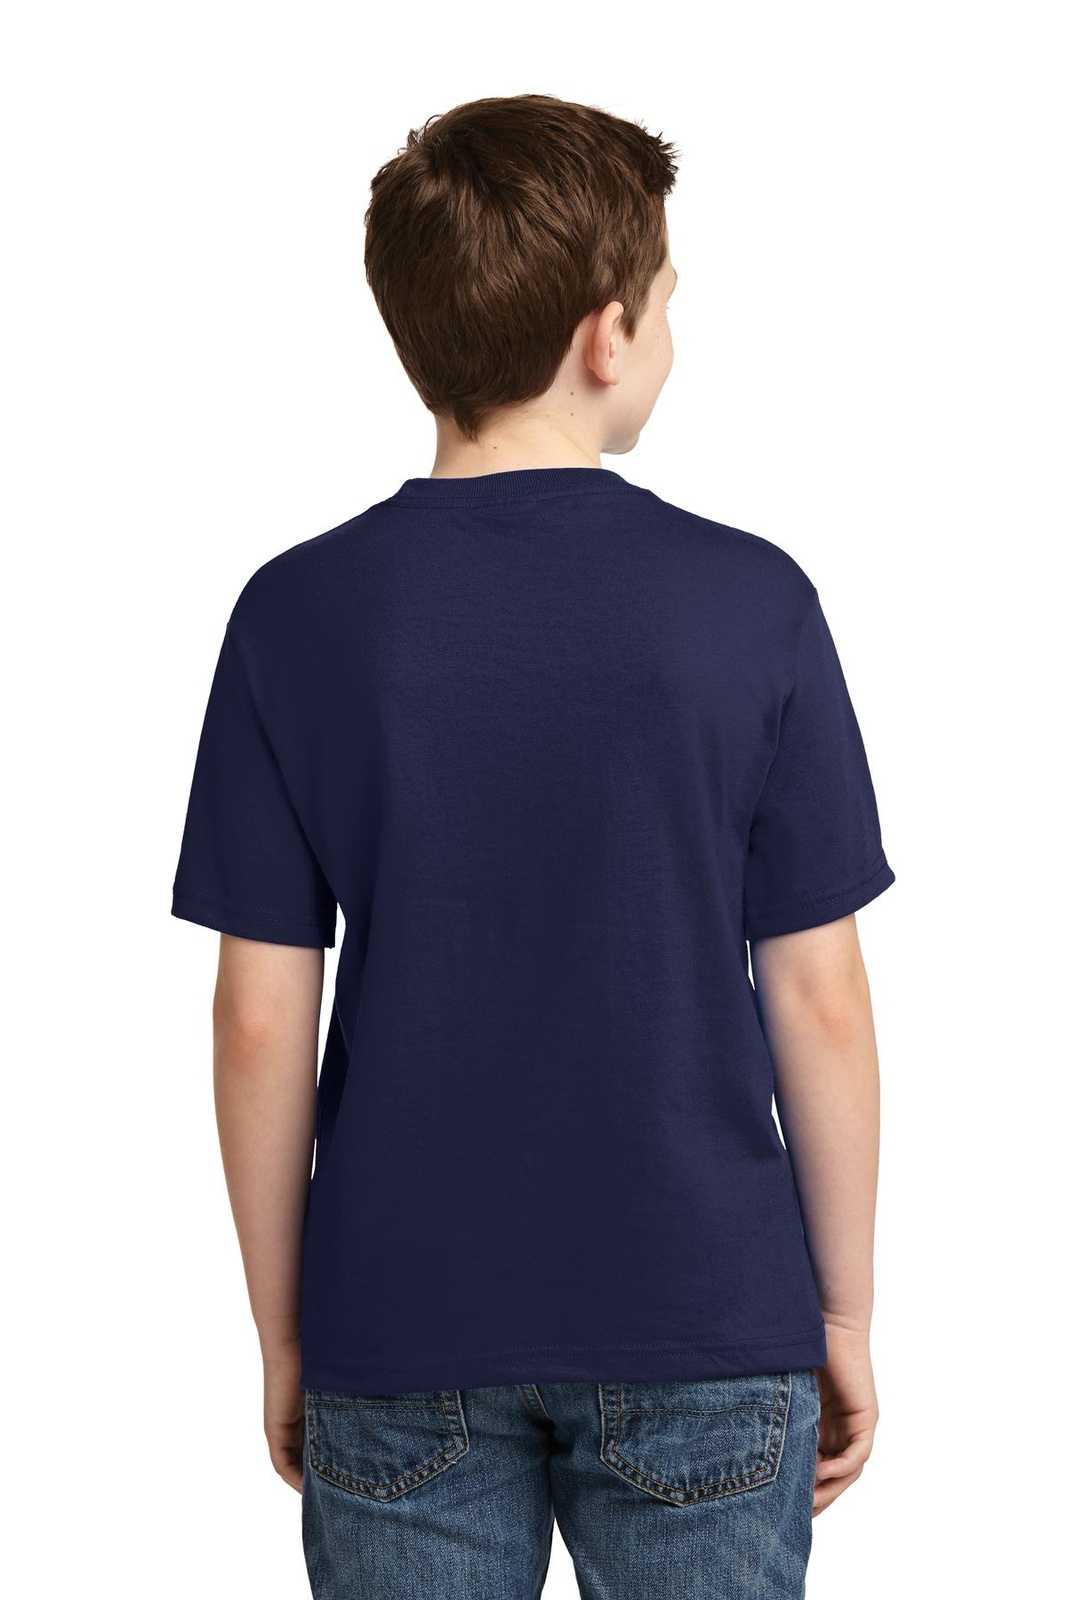 Jerzees 29B Youth Dri-Power 50/50 Cotton/Poly T-Shirt - Navy - HIT a Double